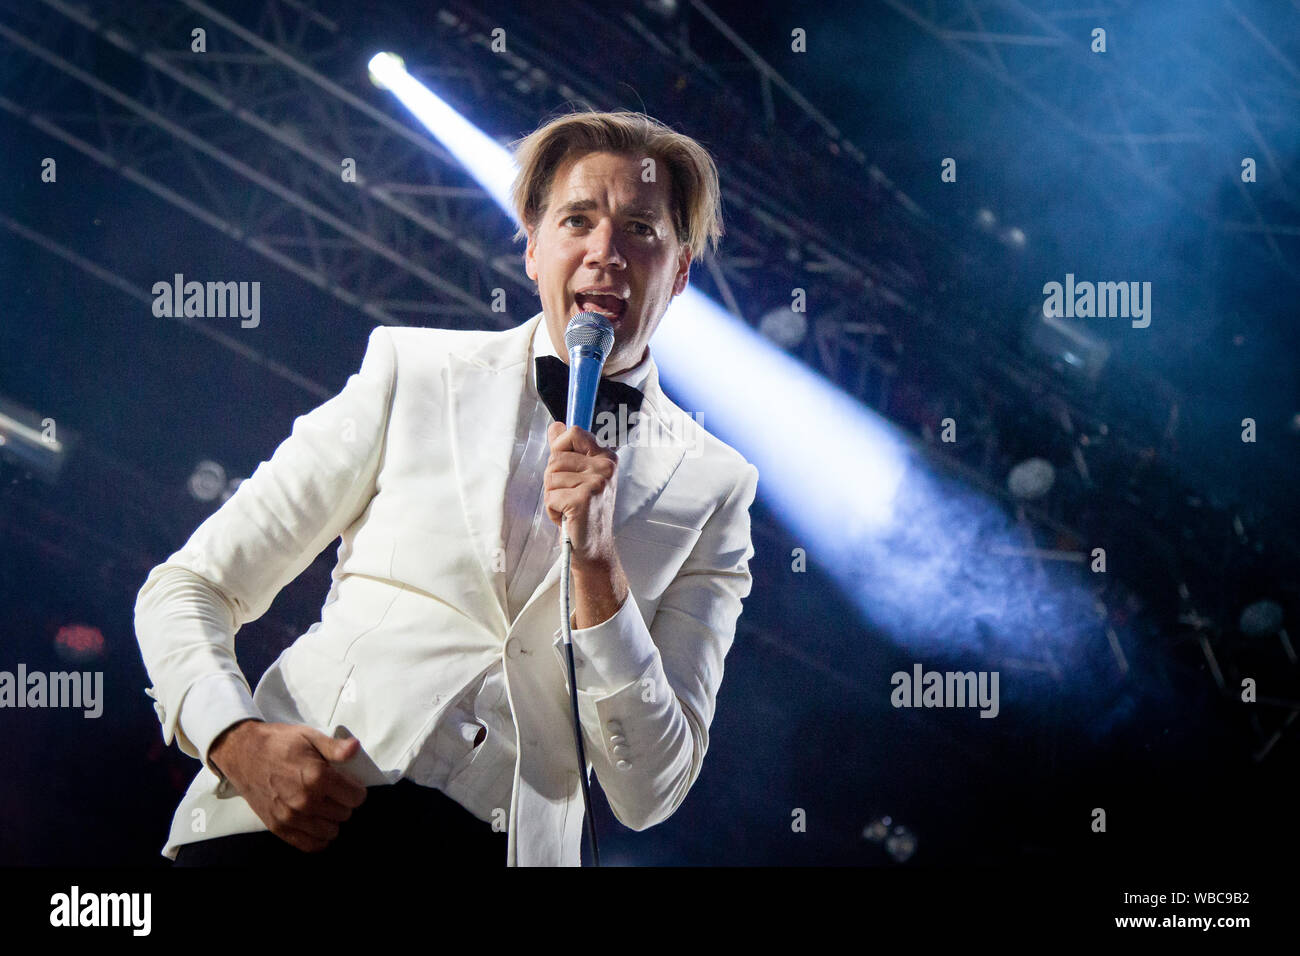 Trondheim, Norway. August 16th, 2019. The Swedish rock band The Hives performs a live concert during the Norwegian music festival Pstereo 2019 in Trondheim. Here vocalist Pelle Almqvist is seen live on stage. (Photo credit: Gonzales Photo - Tor Atle Kleven). Stock Photo